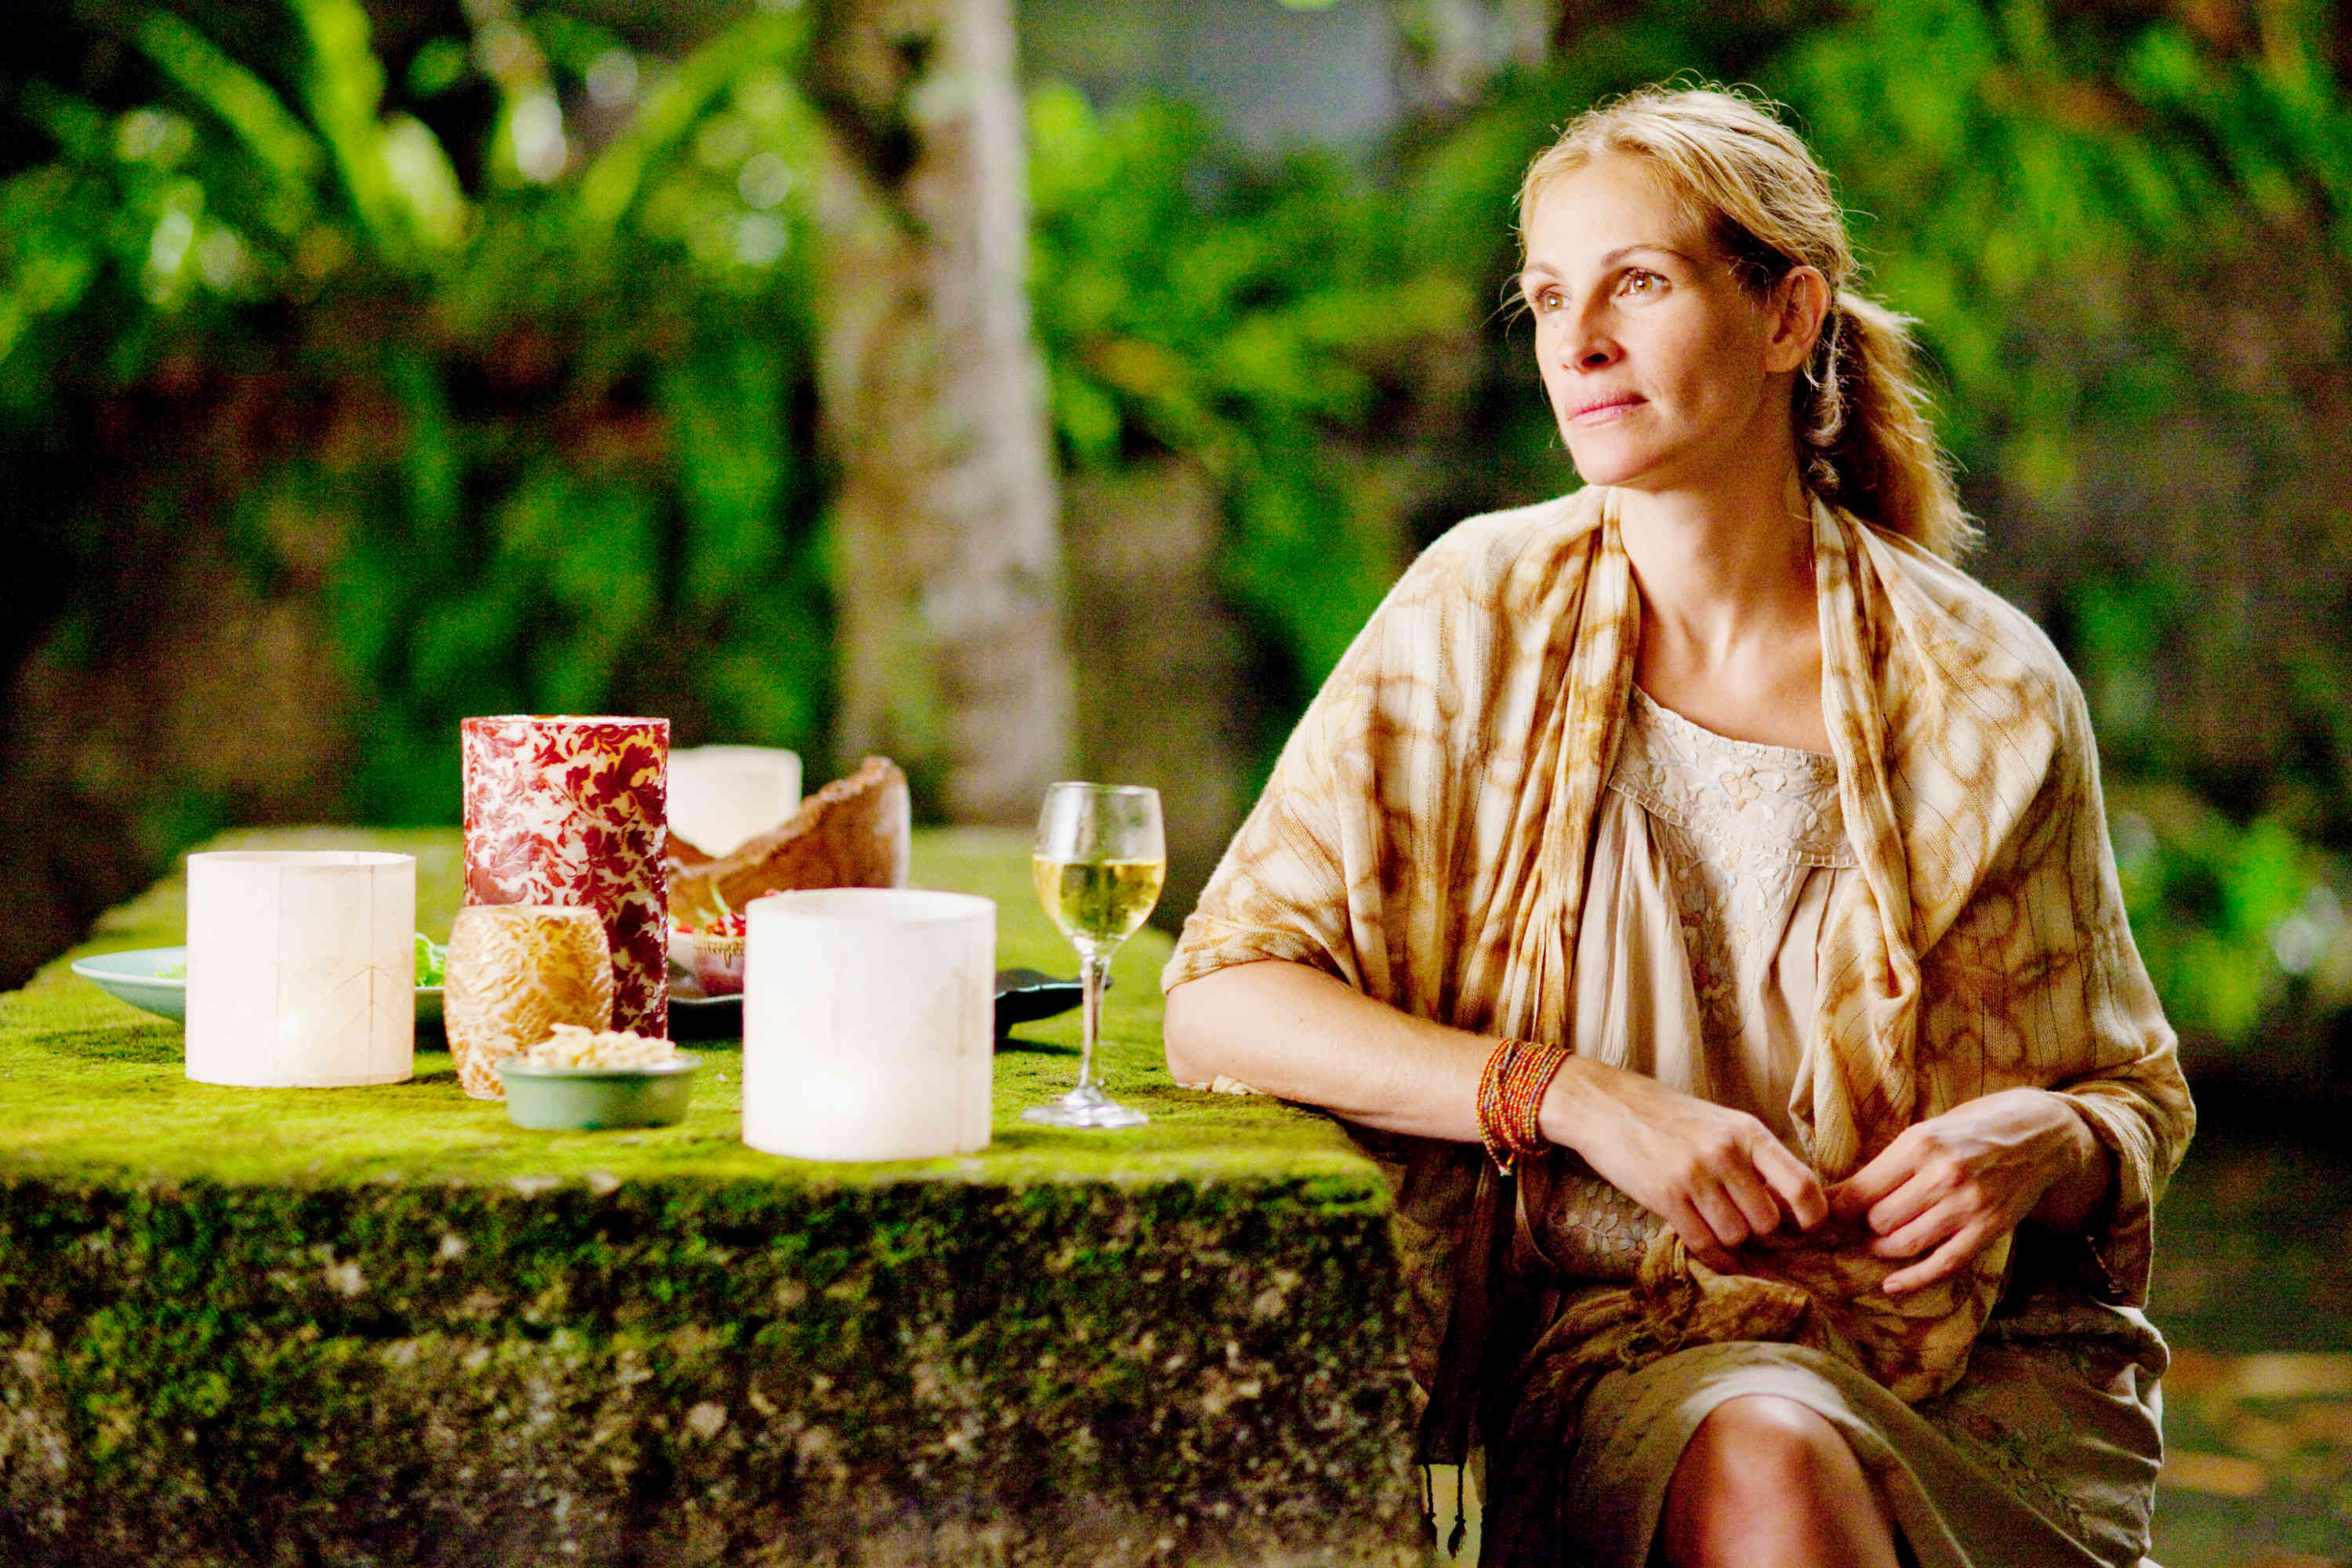 Eat, Pray, Love (2010) Picture, Trailer, Reviews, News, DVD and Soundtrack